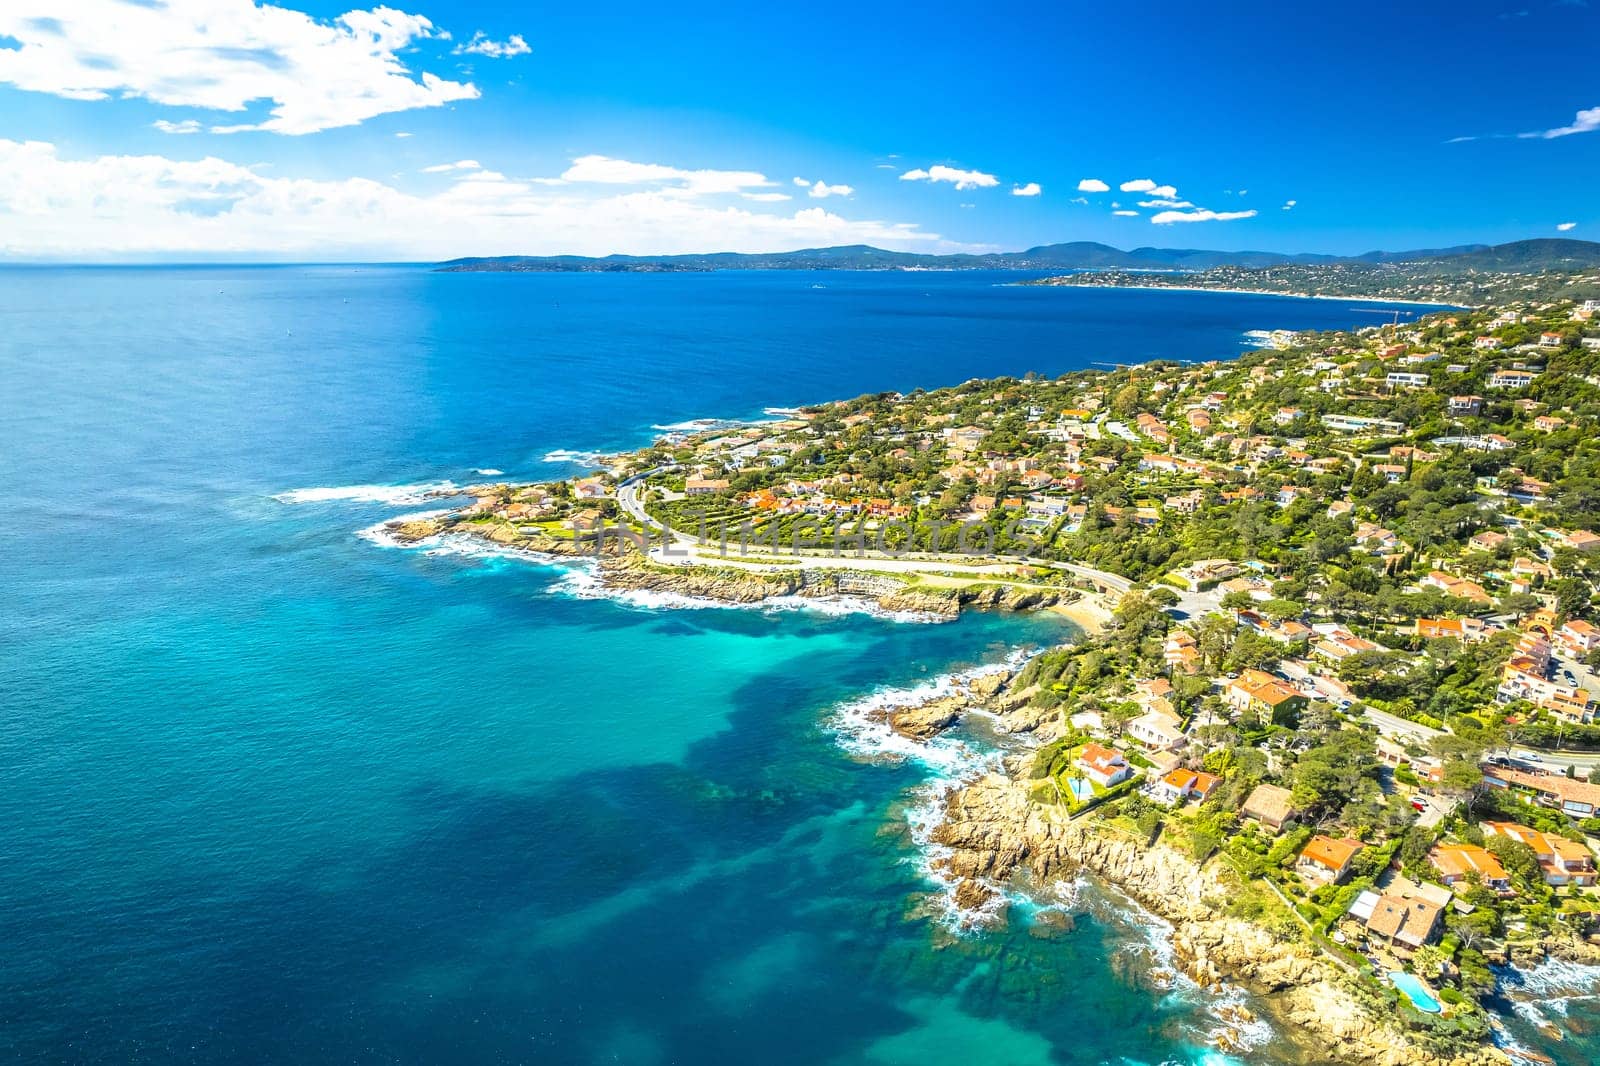 Scenic coastline of French riviera near Sainte Maxime aerial view, southern France